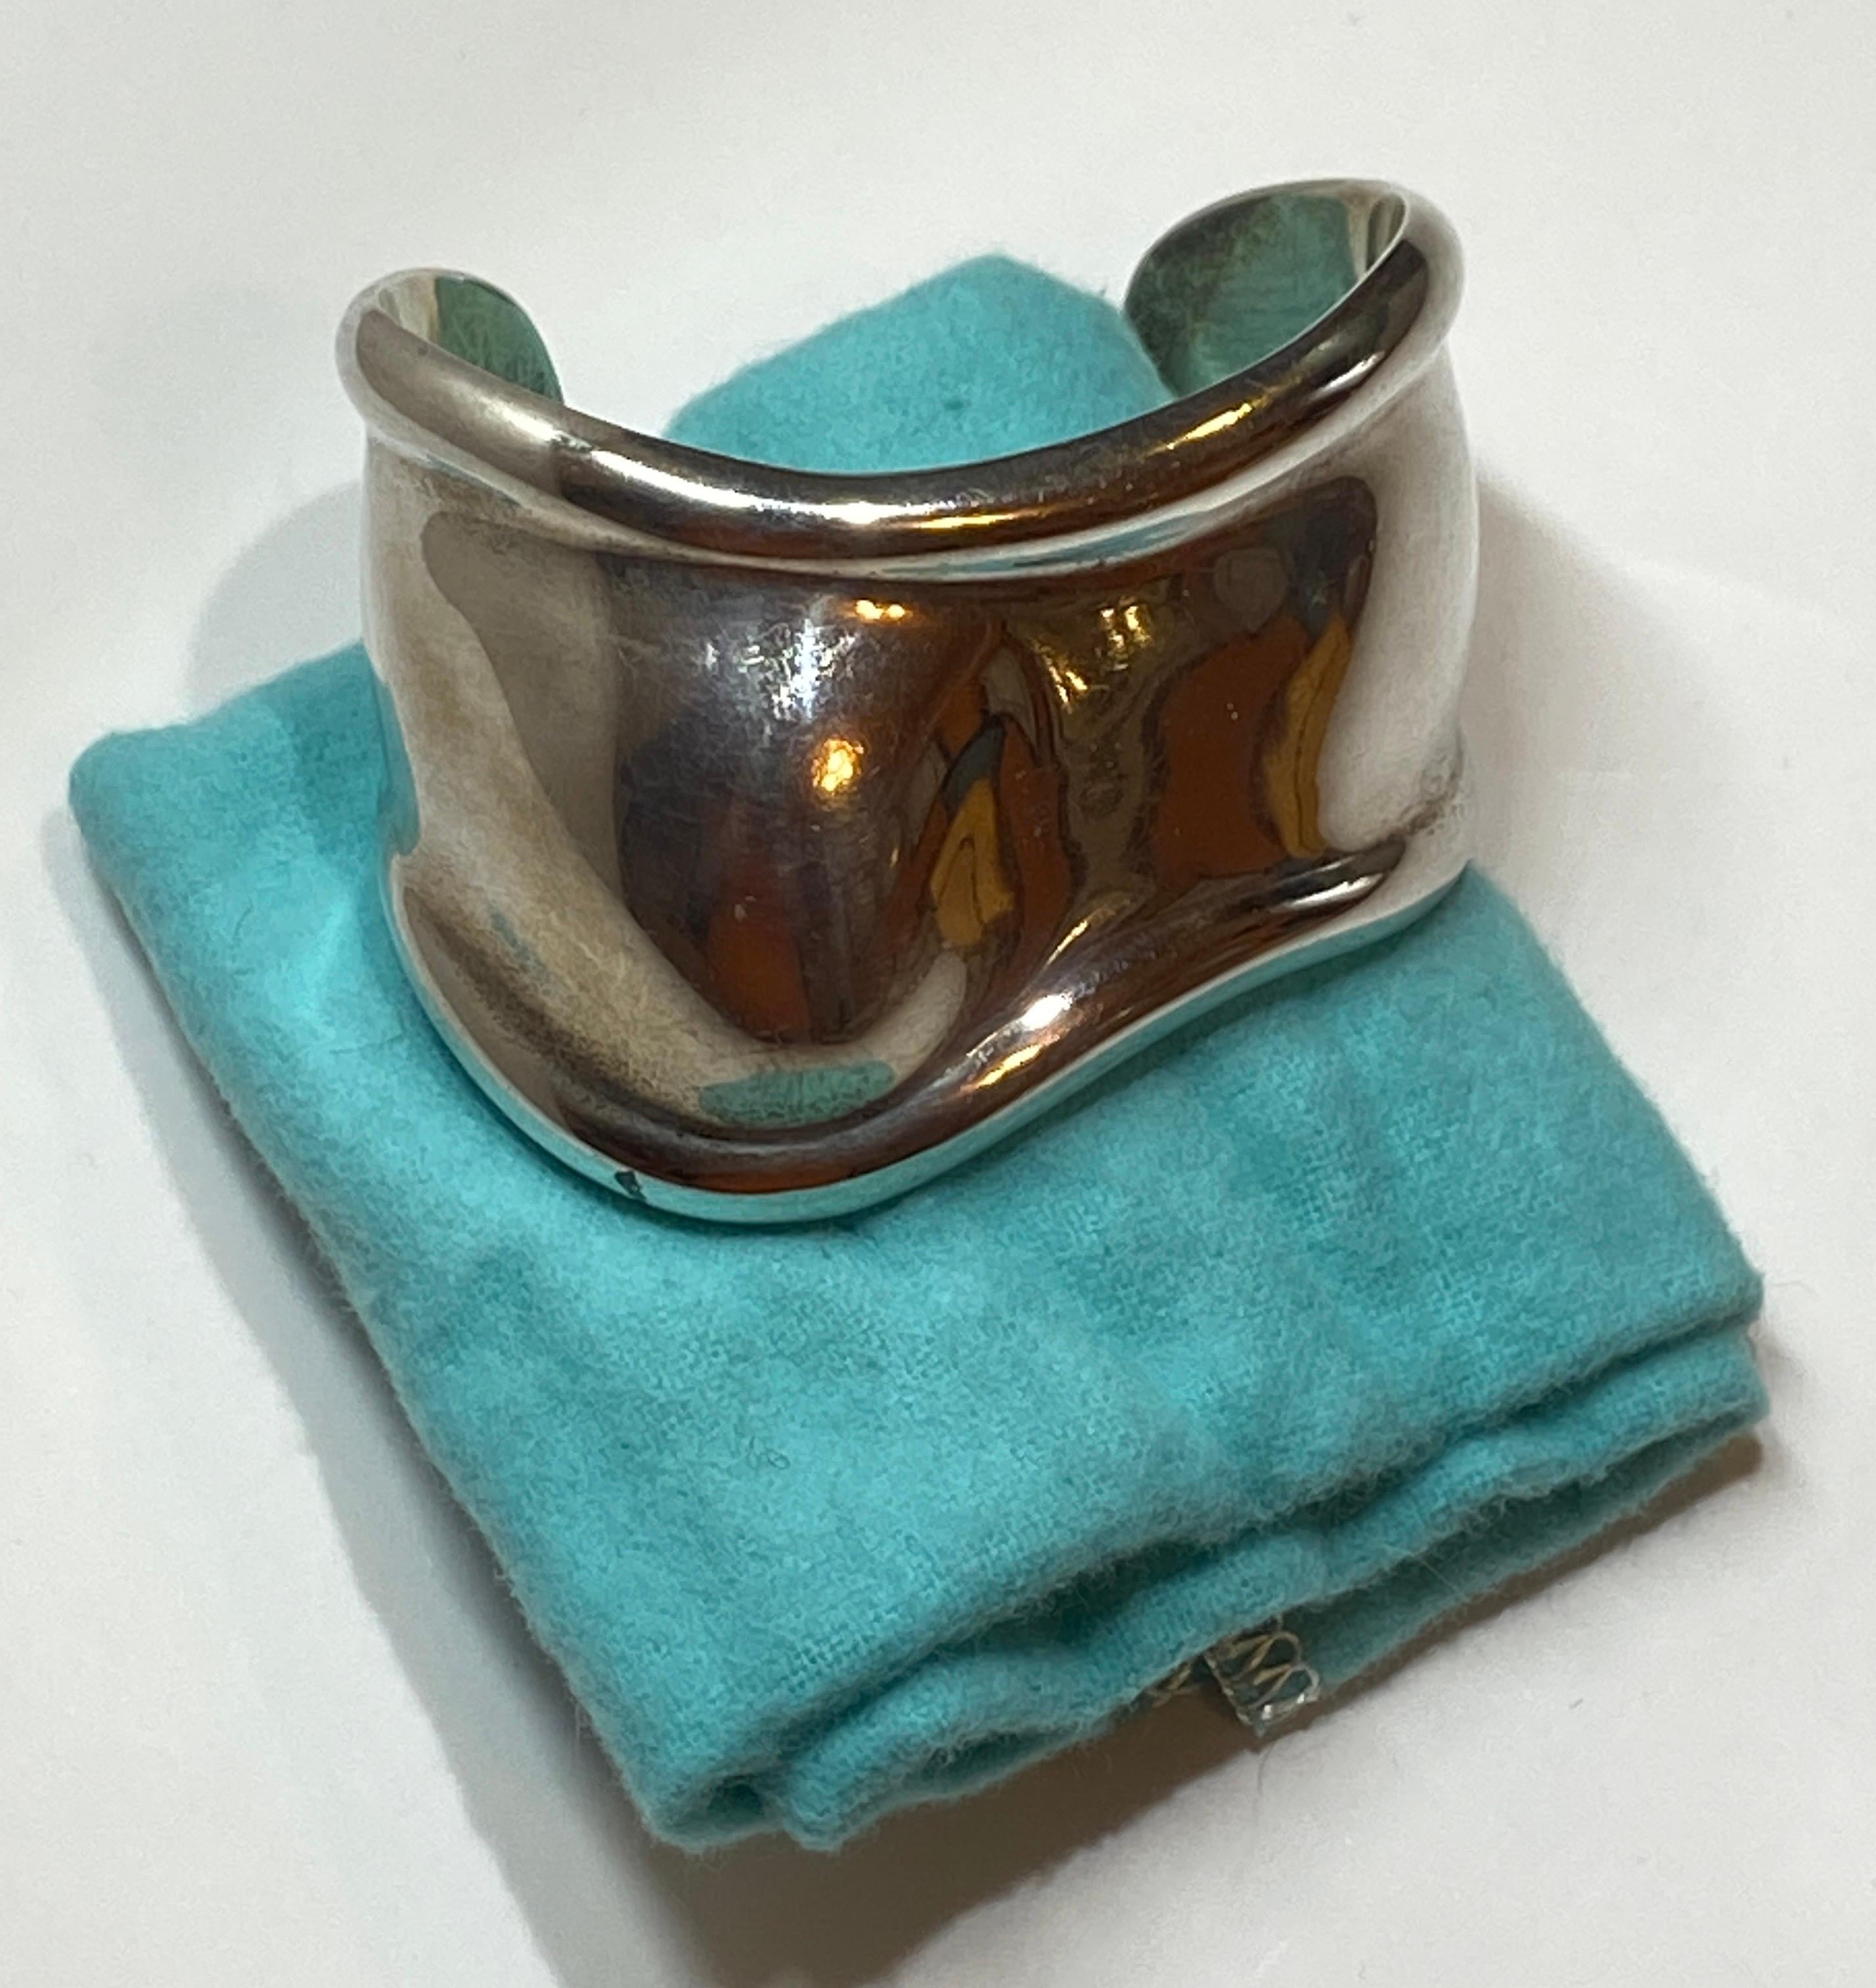    This wonderfully elegant signature sterling-silver cuff designed by Elsa Peretti for the famed Tiffany & Co. is sized 